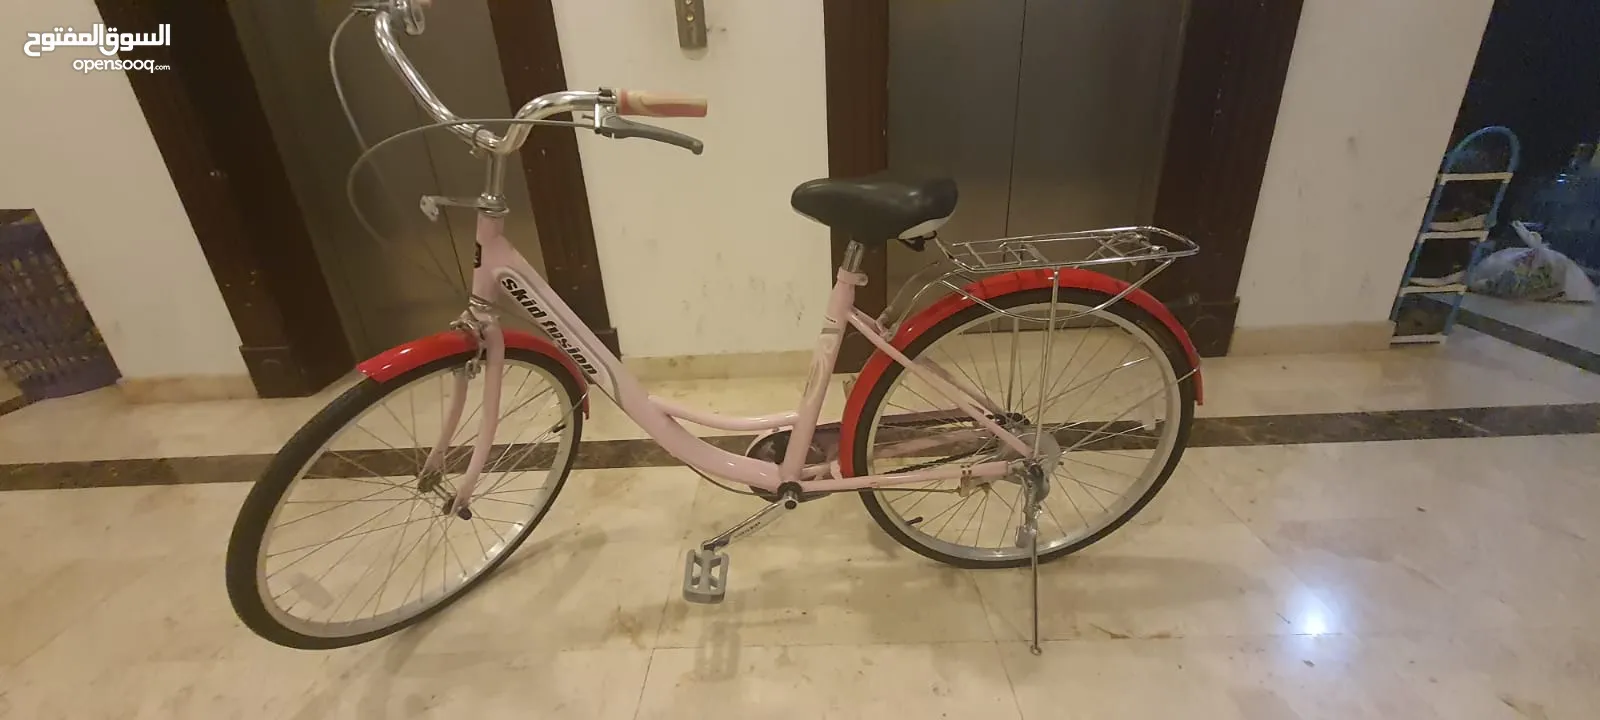 Girl Cycle for sale-12 BD only